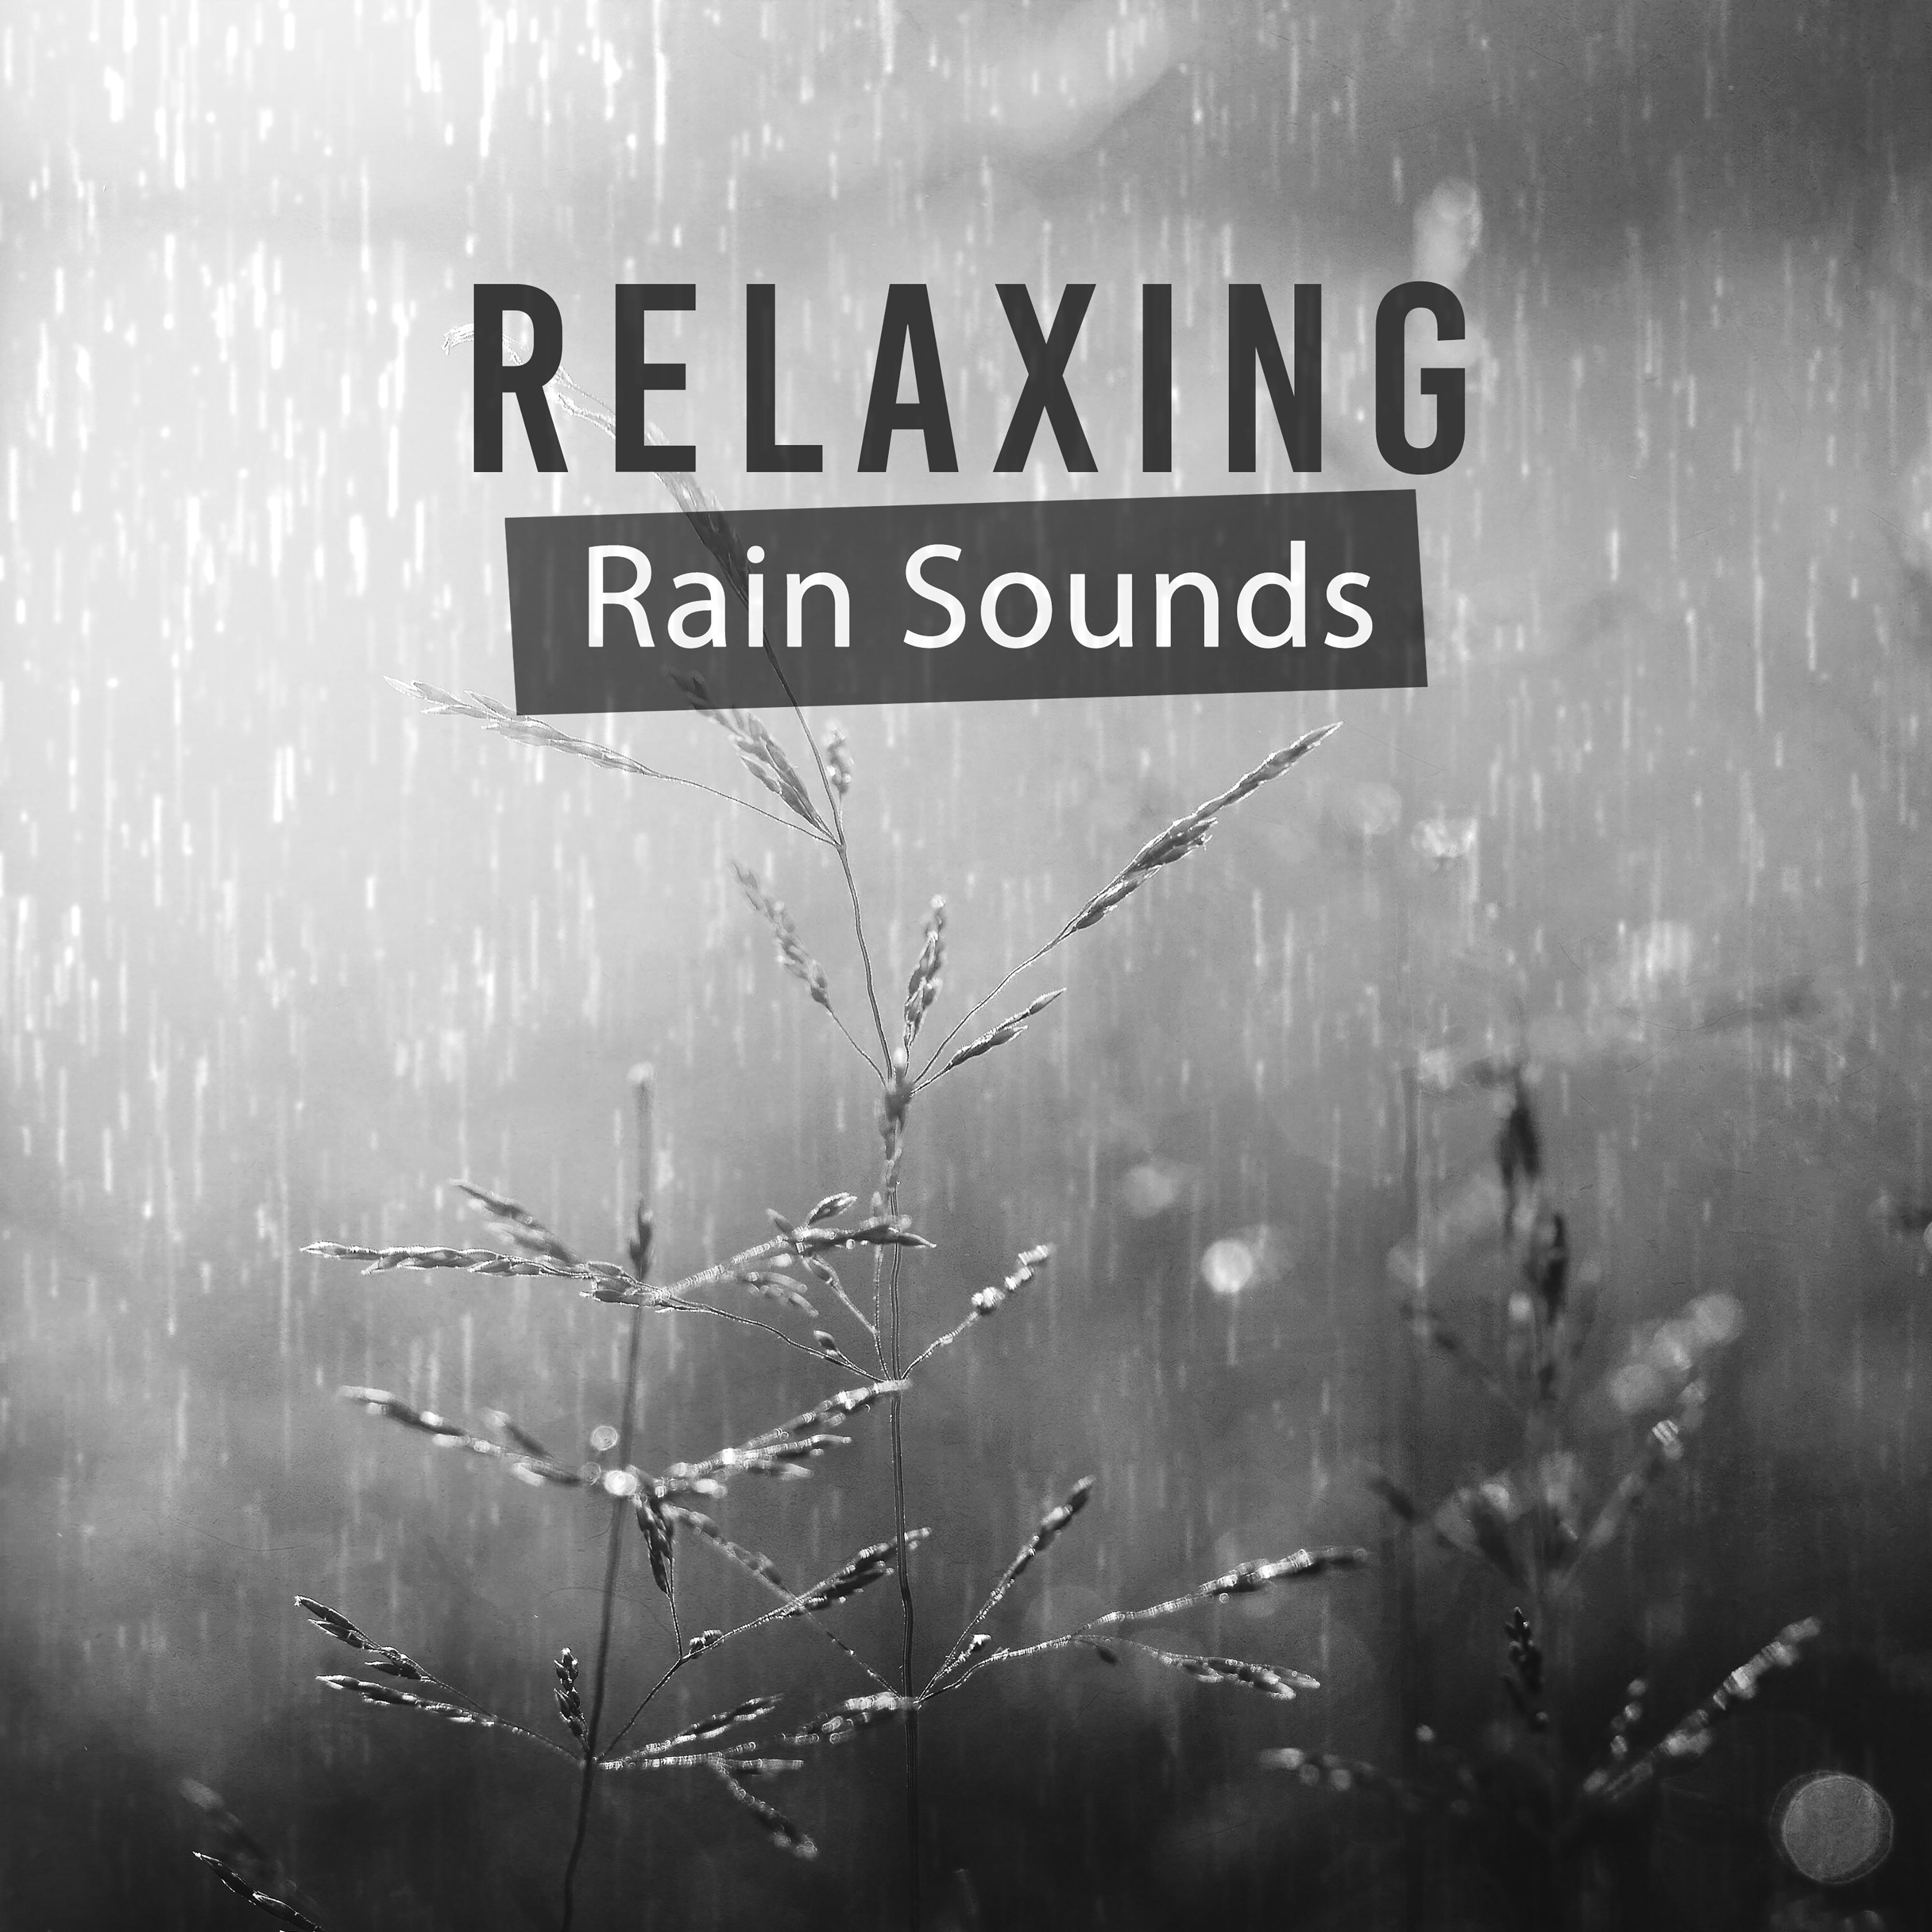 Relaxing Rain Sounds – Sounds to Rest, Calming Water Waves, Healing Therapy, Rain Music